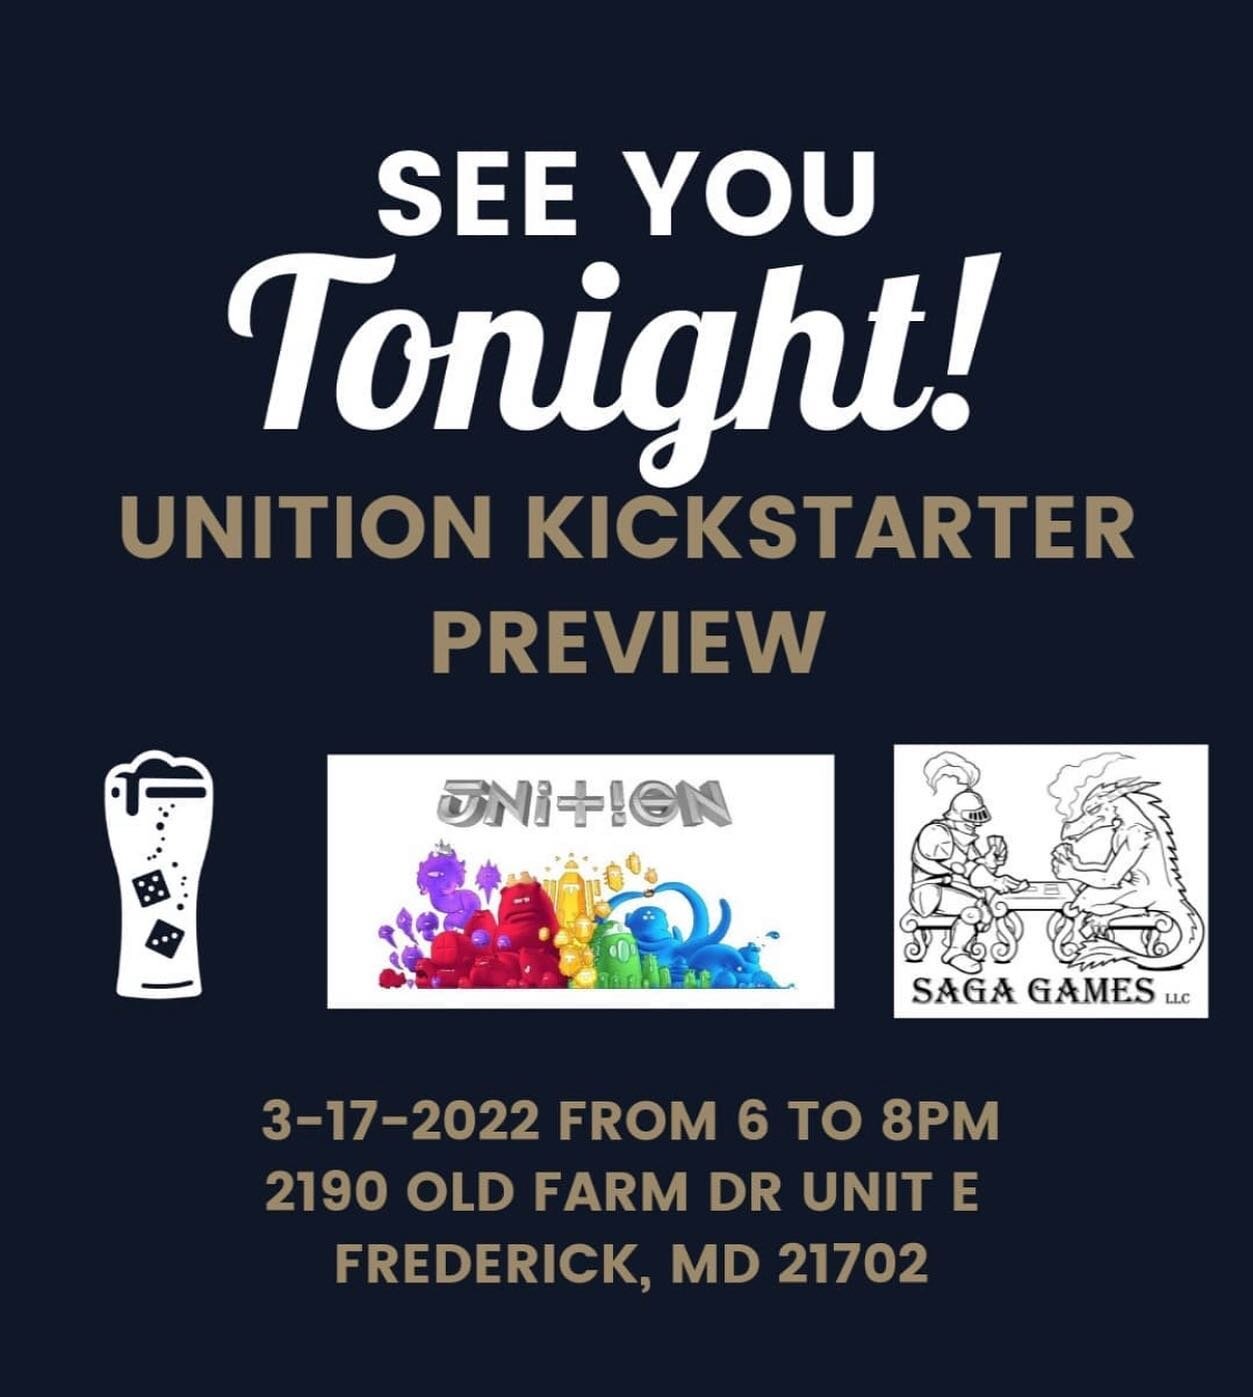 Tonight at 6pm we'll be the @aleventures crew at Saga Games in Frederick, MD for a Unition gameplay preview. Stop by and play the game, meet some new folks, and ask whatever questions you have. 

In other news, the Kickstarter is still going strong. 